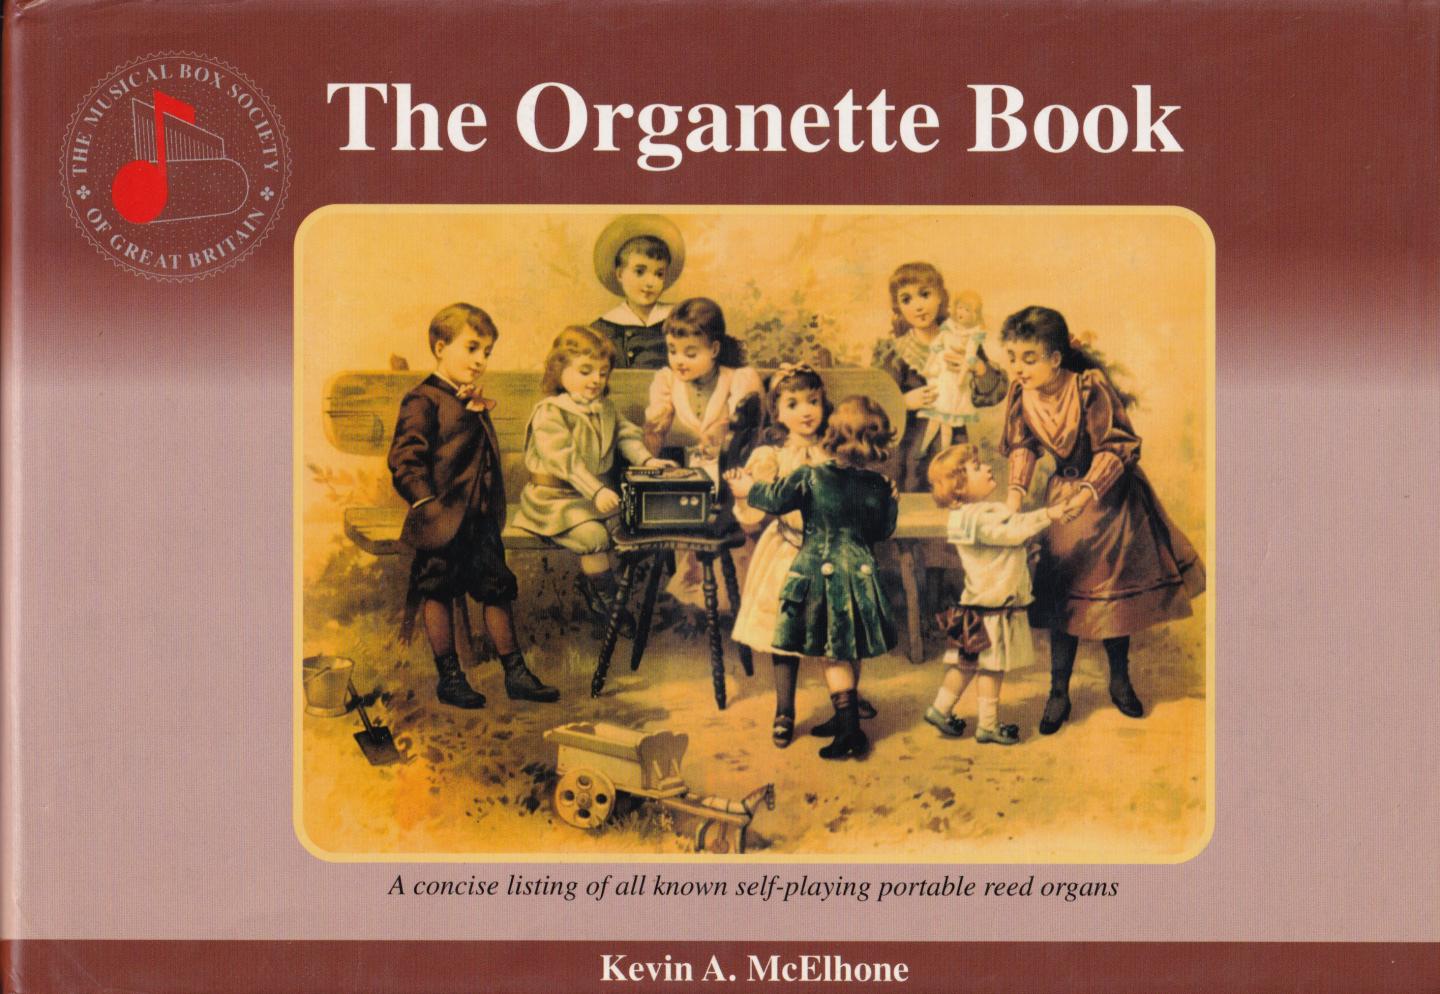 McElhone, Kevin A. (ds1352) - The Organette Book. A concise listing of all known self-playing portable reed organs